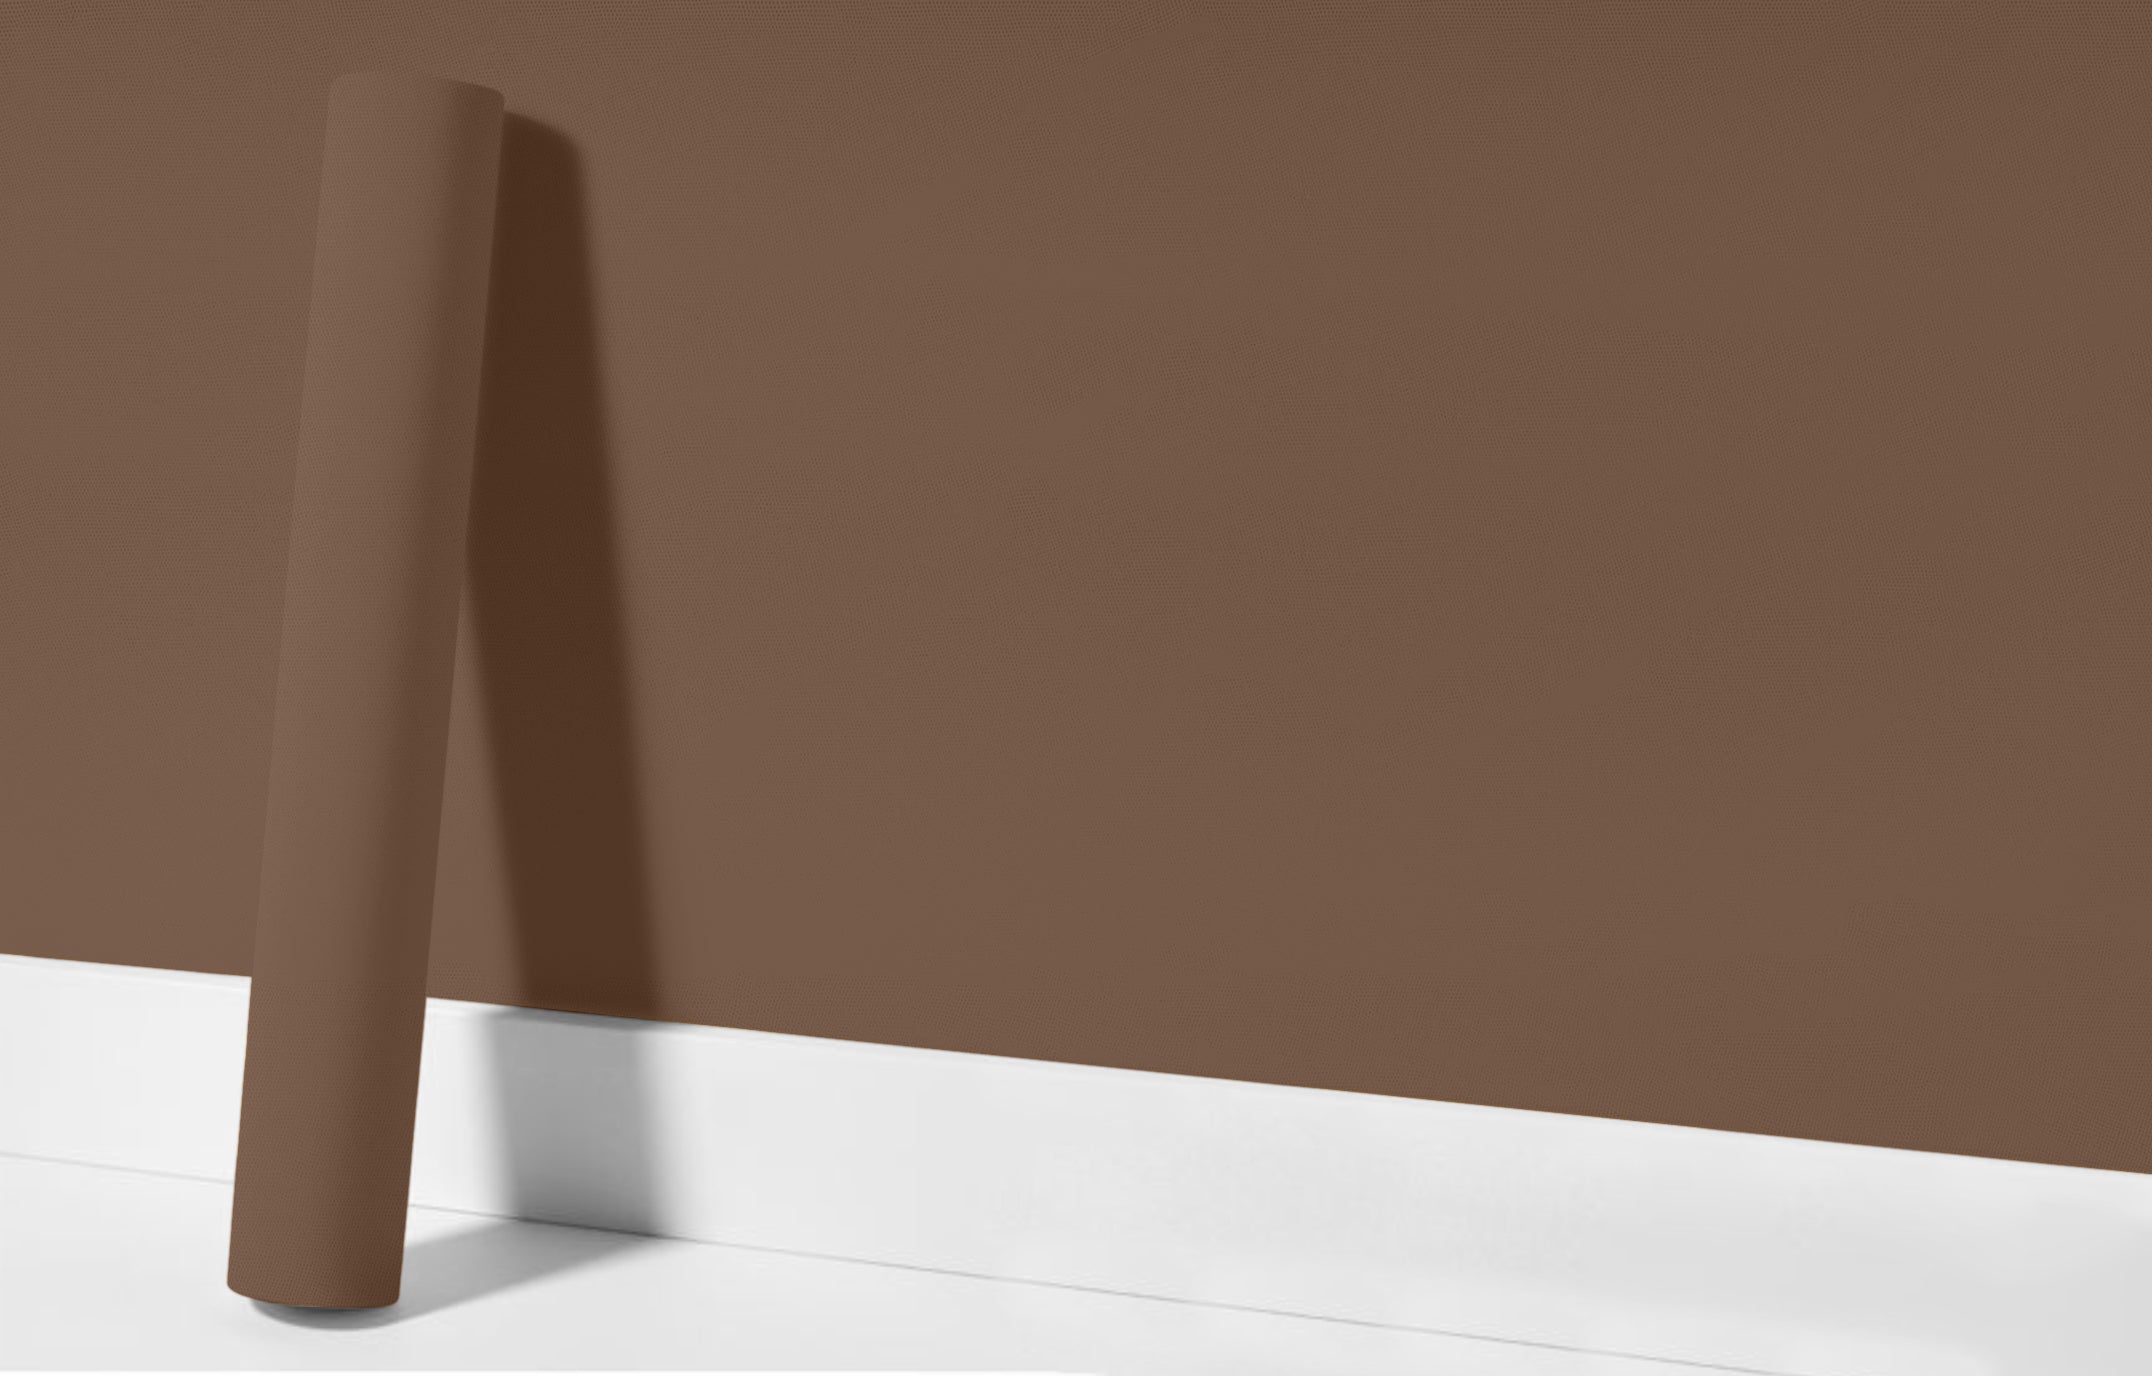 Peel & Stick Removable Re-usable Paint - Color RAL 8025 Pale Brown - offRAL™ - RALRAW LLC, USA